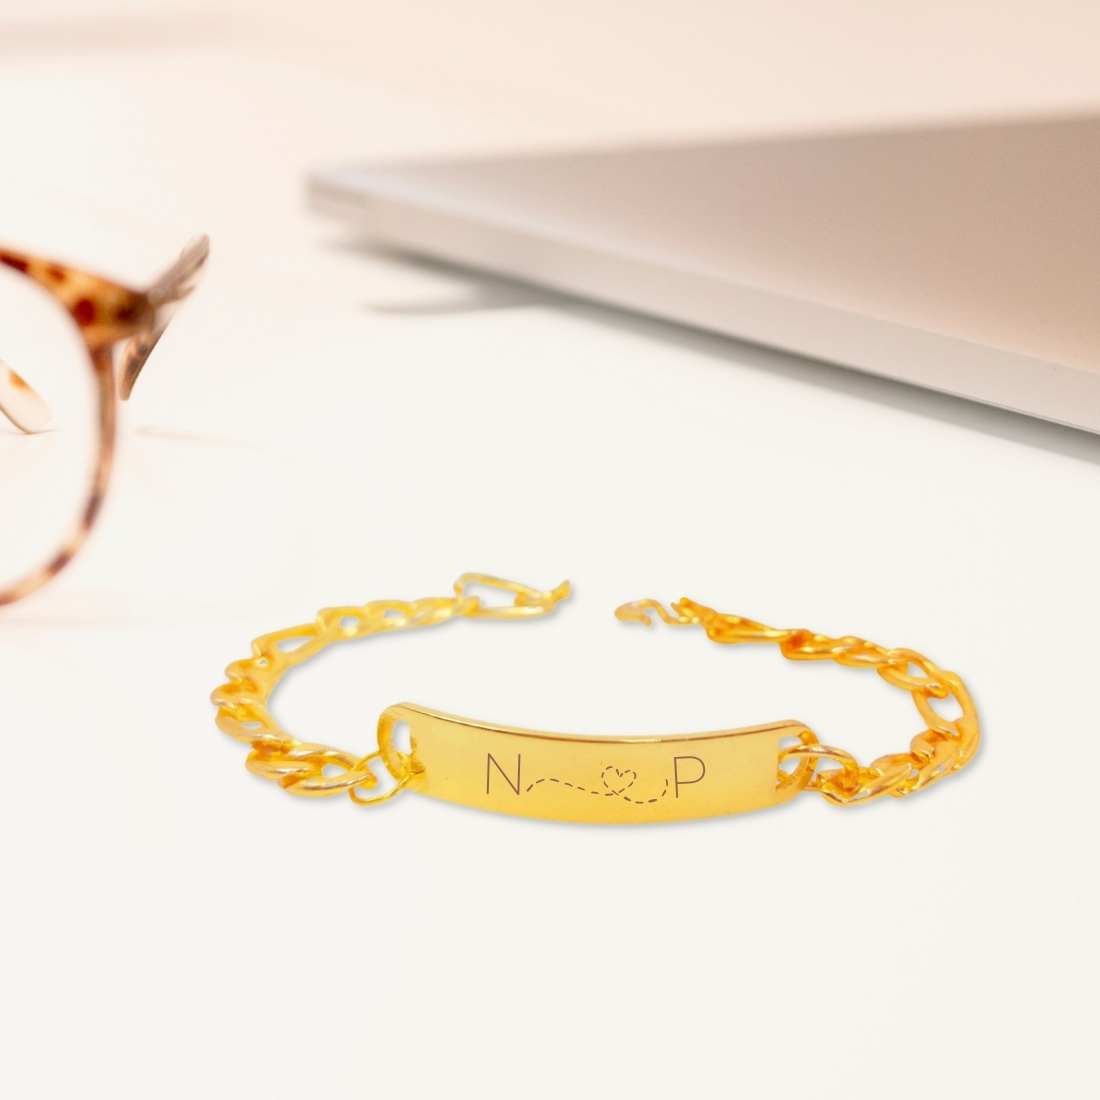 Buy Customized Personalized Single Name Hand Bracelet With Name Or Love Name  With 24k Gold Plating and Laser Engraved Finish For Unisex Adult at  Amazon.in